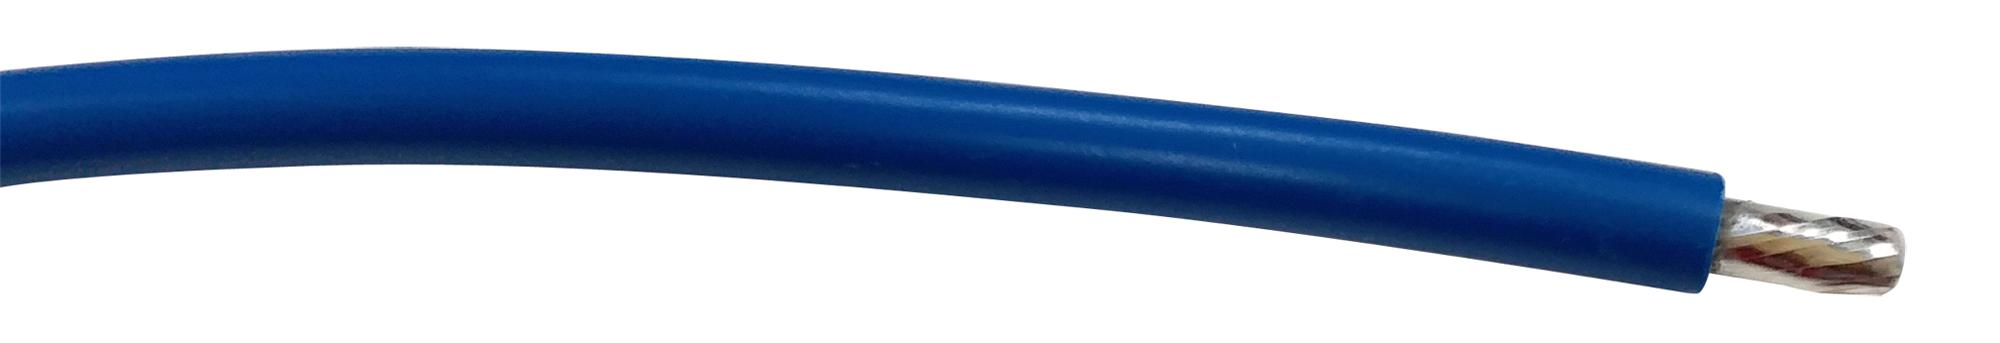 PP002584 CABLE WIRE, 22AWG, BLUE, 305M PRO POWER